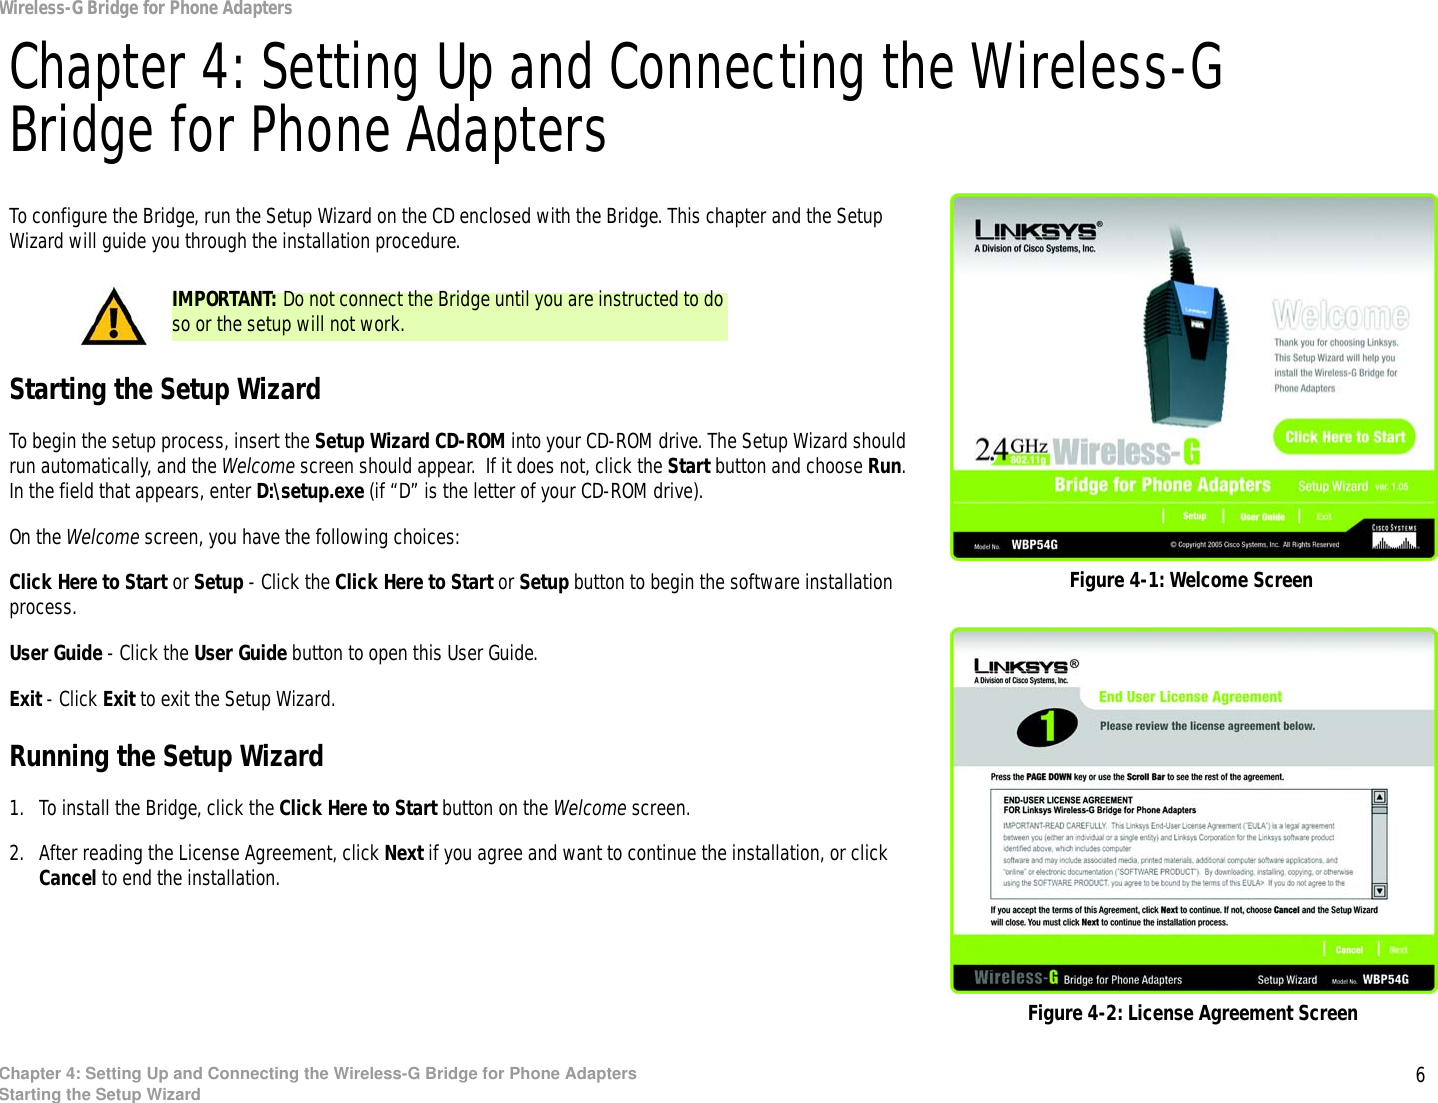 6Chapter 4: Setting Up and Connecting the Wireless-G Bridge for Phone AdaptersStarting the Setup WizardWireless-G Bridge for Phone AdaptersChapter 4: Setting Up and Connecting the Wireless-G Bridge for Phone AdaptersTo configure the Bridge, run the Setup Wizard on the CD enclosed with the Bridge. This chapter and the Setup Wizard will guide you through the installation procedure.Starting the Setup WizardTo begin the setup process, insert the Setup Wizard CD-ROM into your CD-ROM drive. The Setup Wizard should run automatically, and the Welcome screen should appear.  If it does not, click the Start button and choose Run. In the field that appears, enter D:\setup.exe (if “D” is the letter of your CD-ROM drive). On the Welcome screen, you have the following choices:Click Here to Start or Setup - Click the Click Here to Start or Setup button to begin the software installation process. User Guide - Click the User Guide button to open this User Guide. Exit - Click Exit to exit the Setup Wizard.Running the Setup Wizard1. To install the Bridge, click the Click Here to Start button on the Welcome screen.2. After reading the License Agreement, click Next if you agree and want to continue the installation, or click Cancel to end the installation.Figure 4-1: Welcome ScreenFigure 4-2: License Agreement ScreenIMPORTANT: Do not connect the Bridge until you are instructed to do so or the setup will not work.